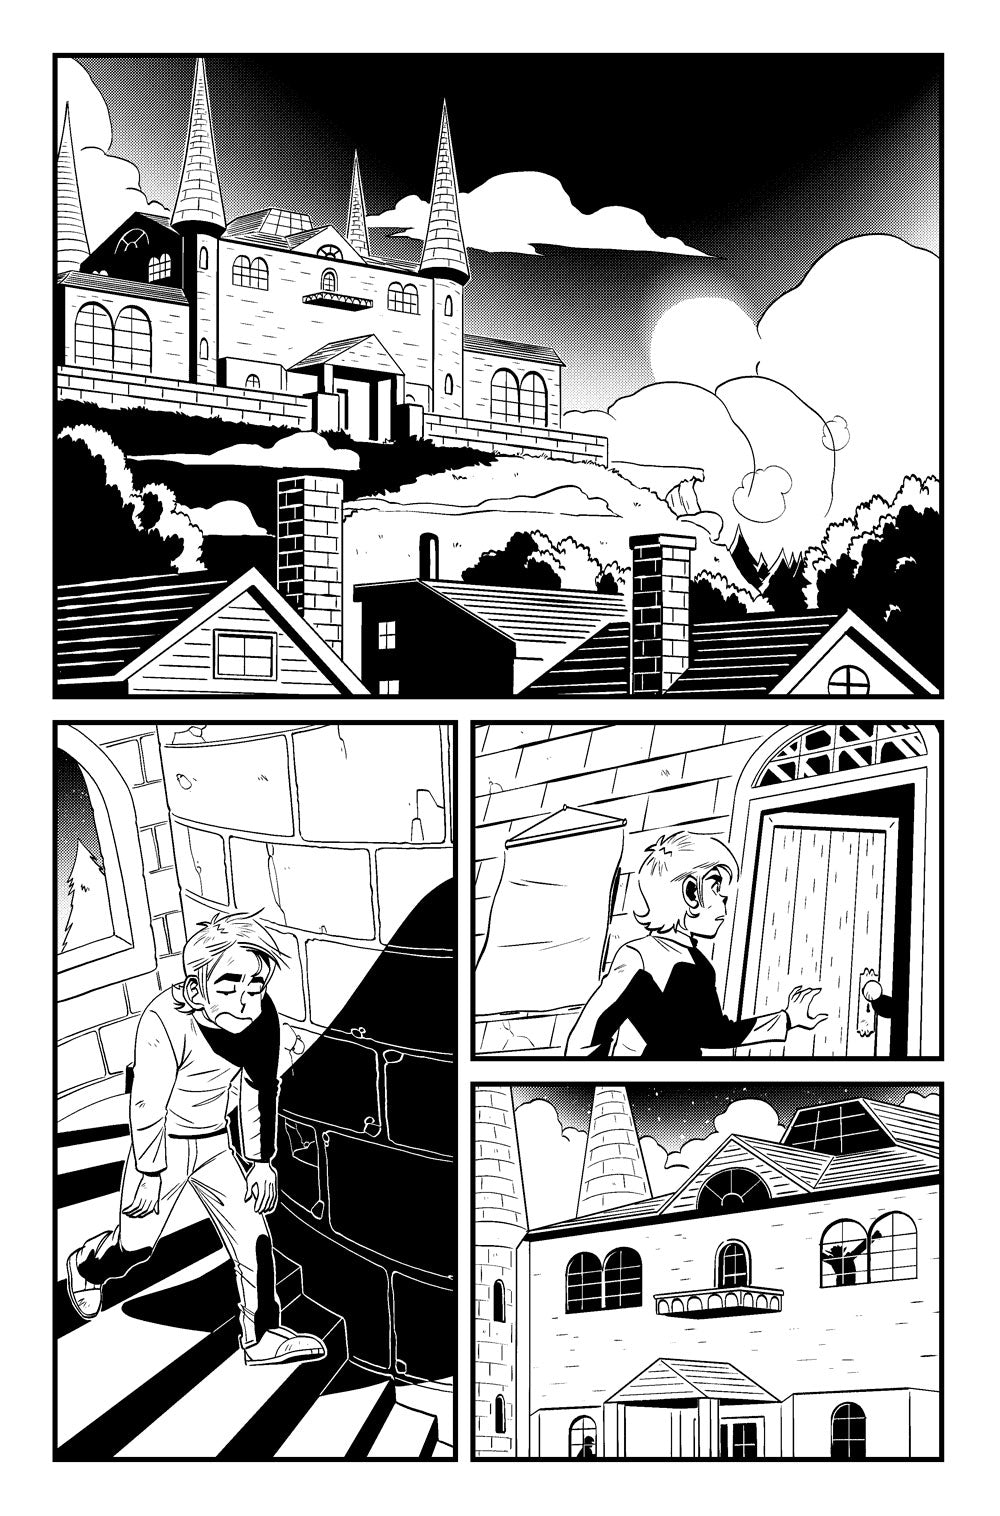 Page 1 From "The Gift That Keeps on Killing" from Toybox of Terror. Art by Ryan Jampole.